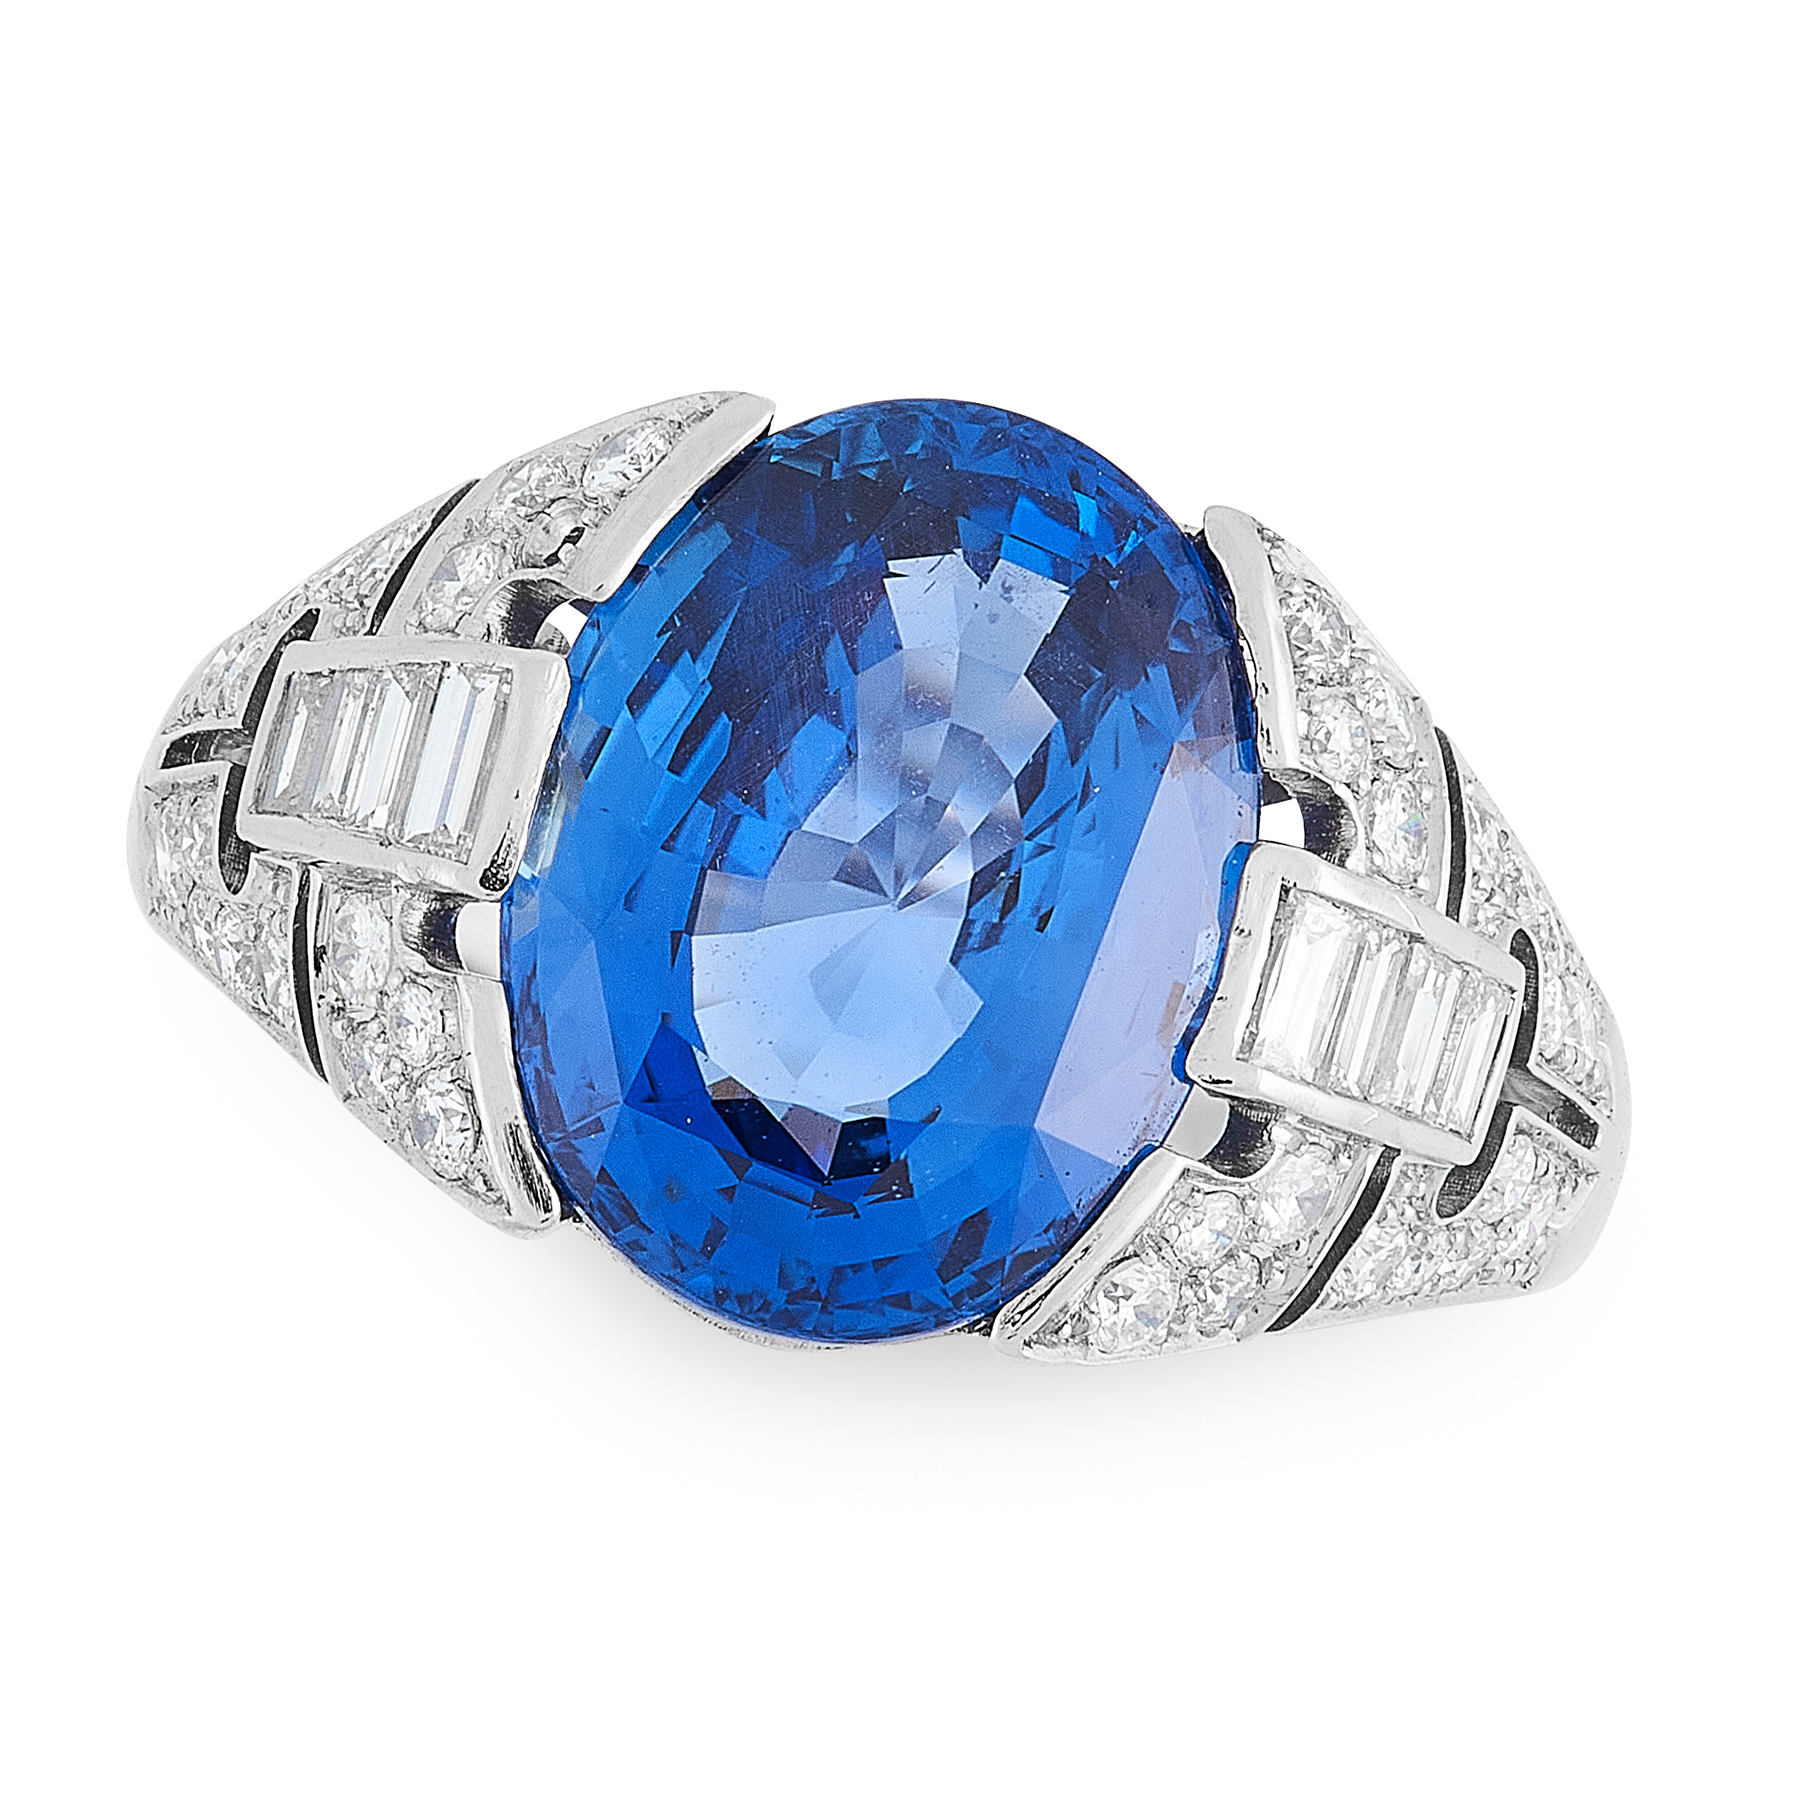 AN IMPORTANT CEYLON NO HEAT SAPPHIRE AND DIAMOND RING in platinum, set with an oval cut blue